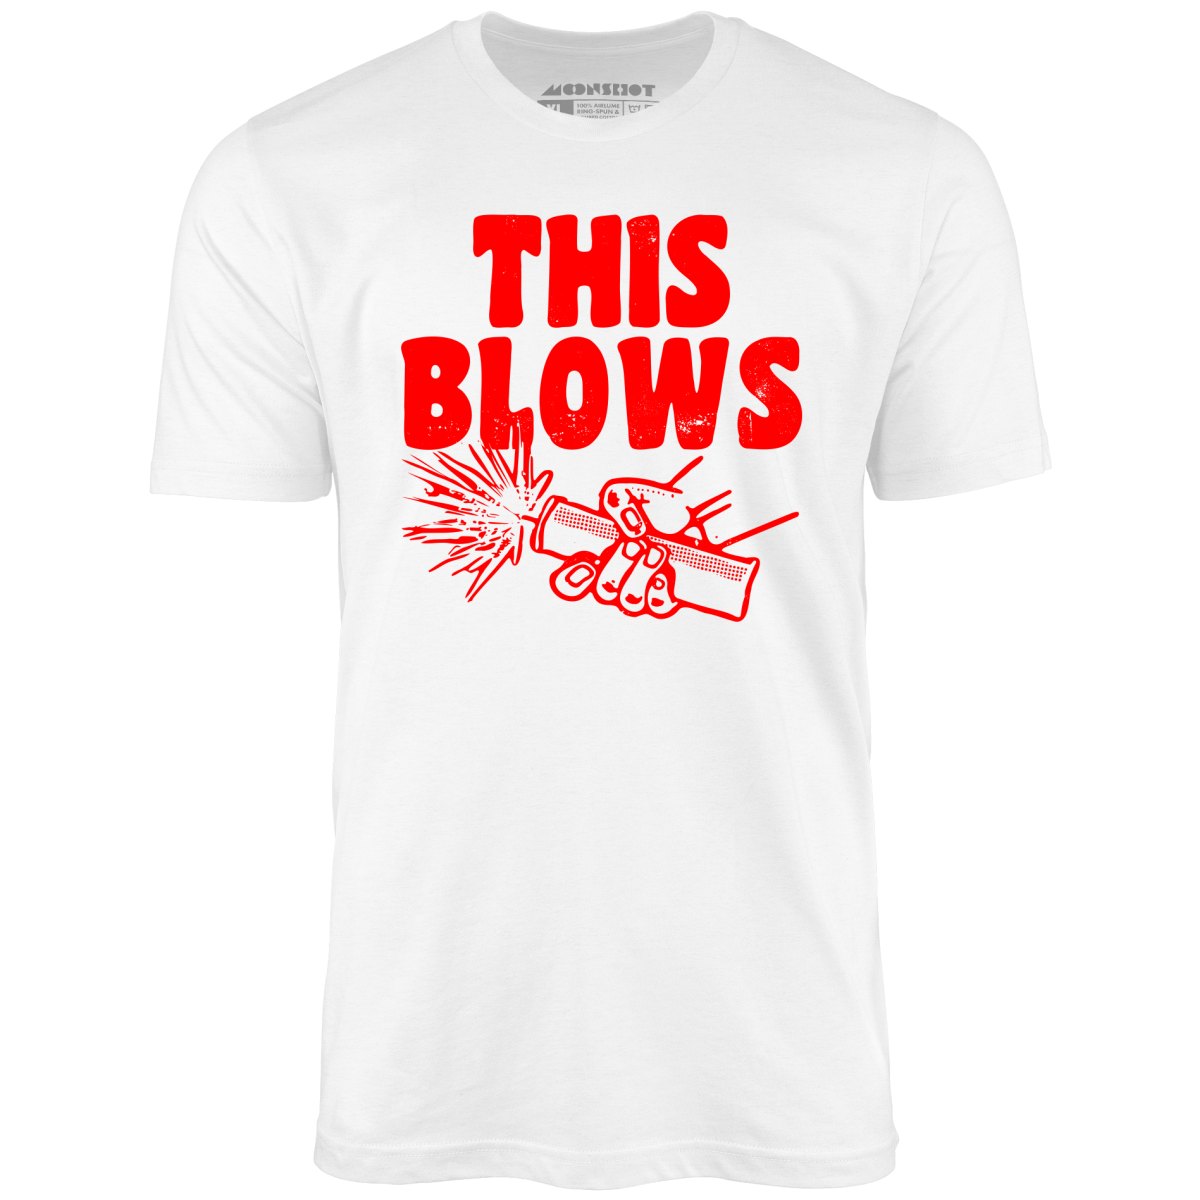 This Blows - Unisex T-Shirt